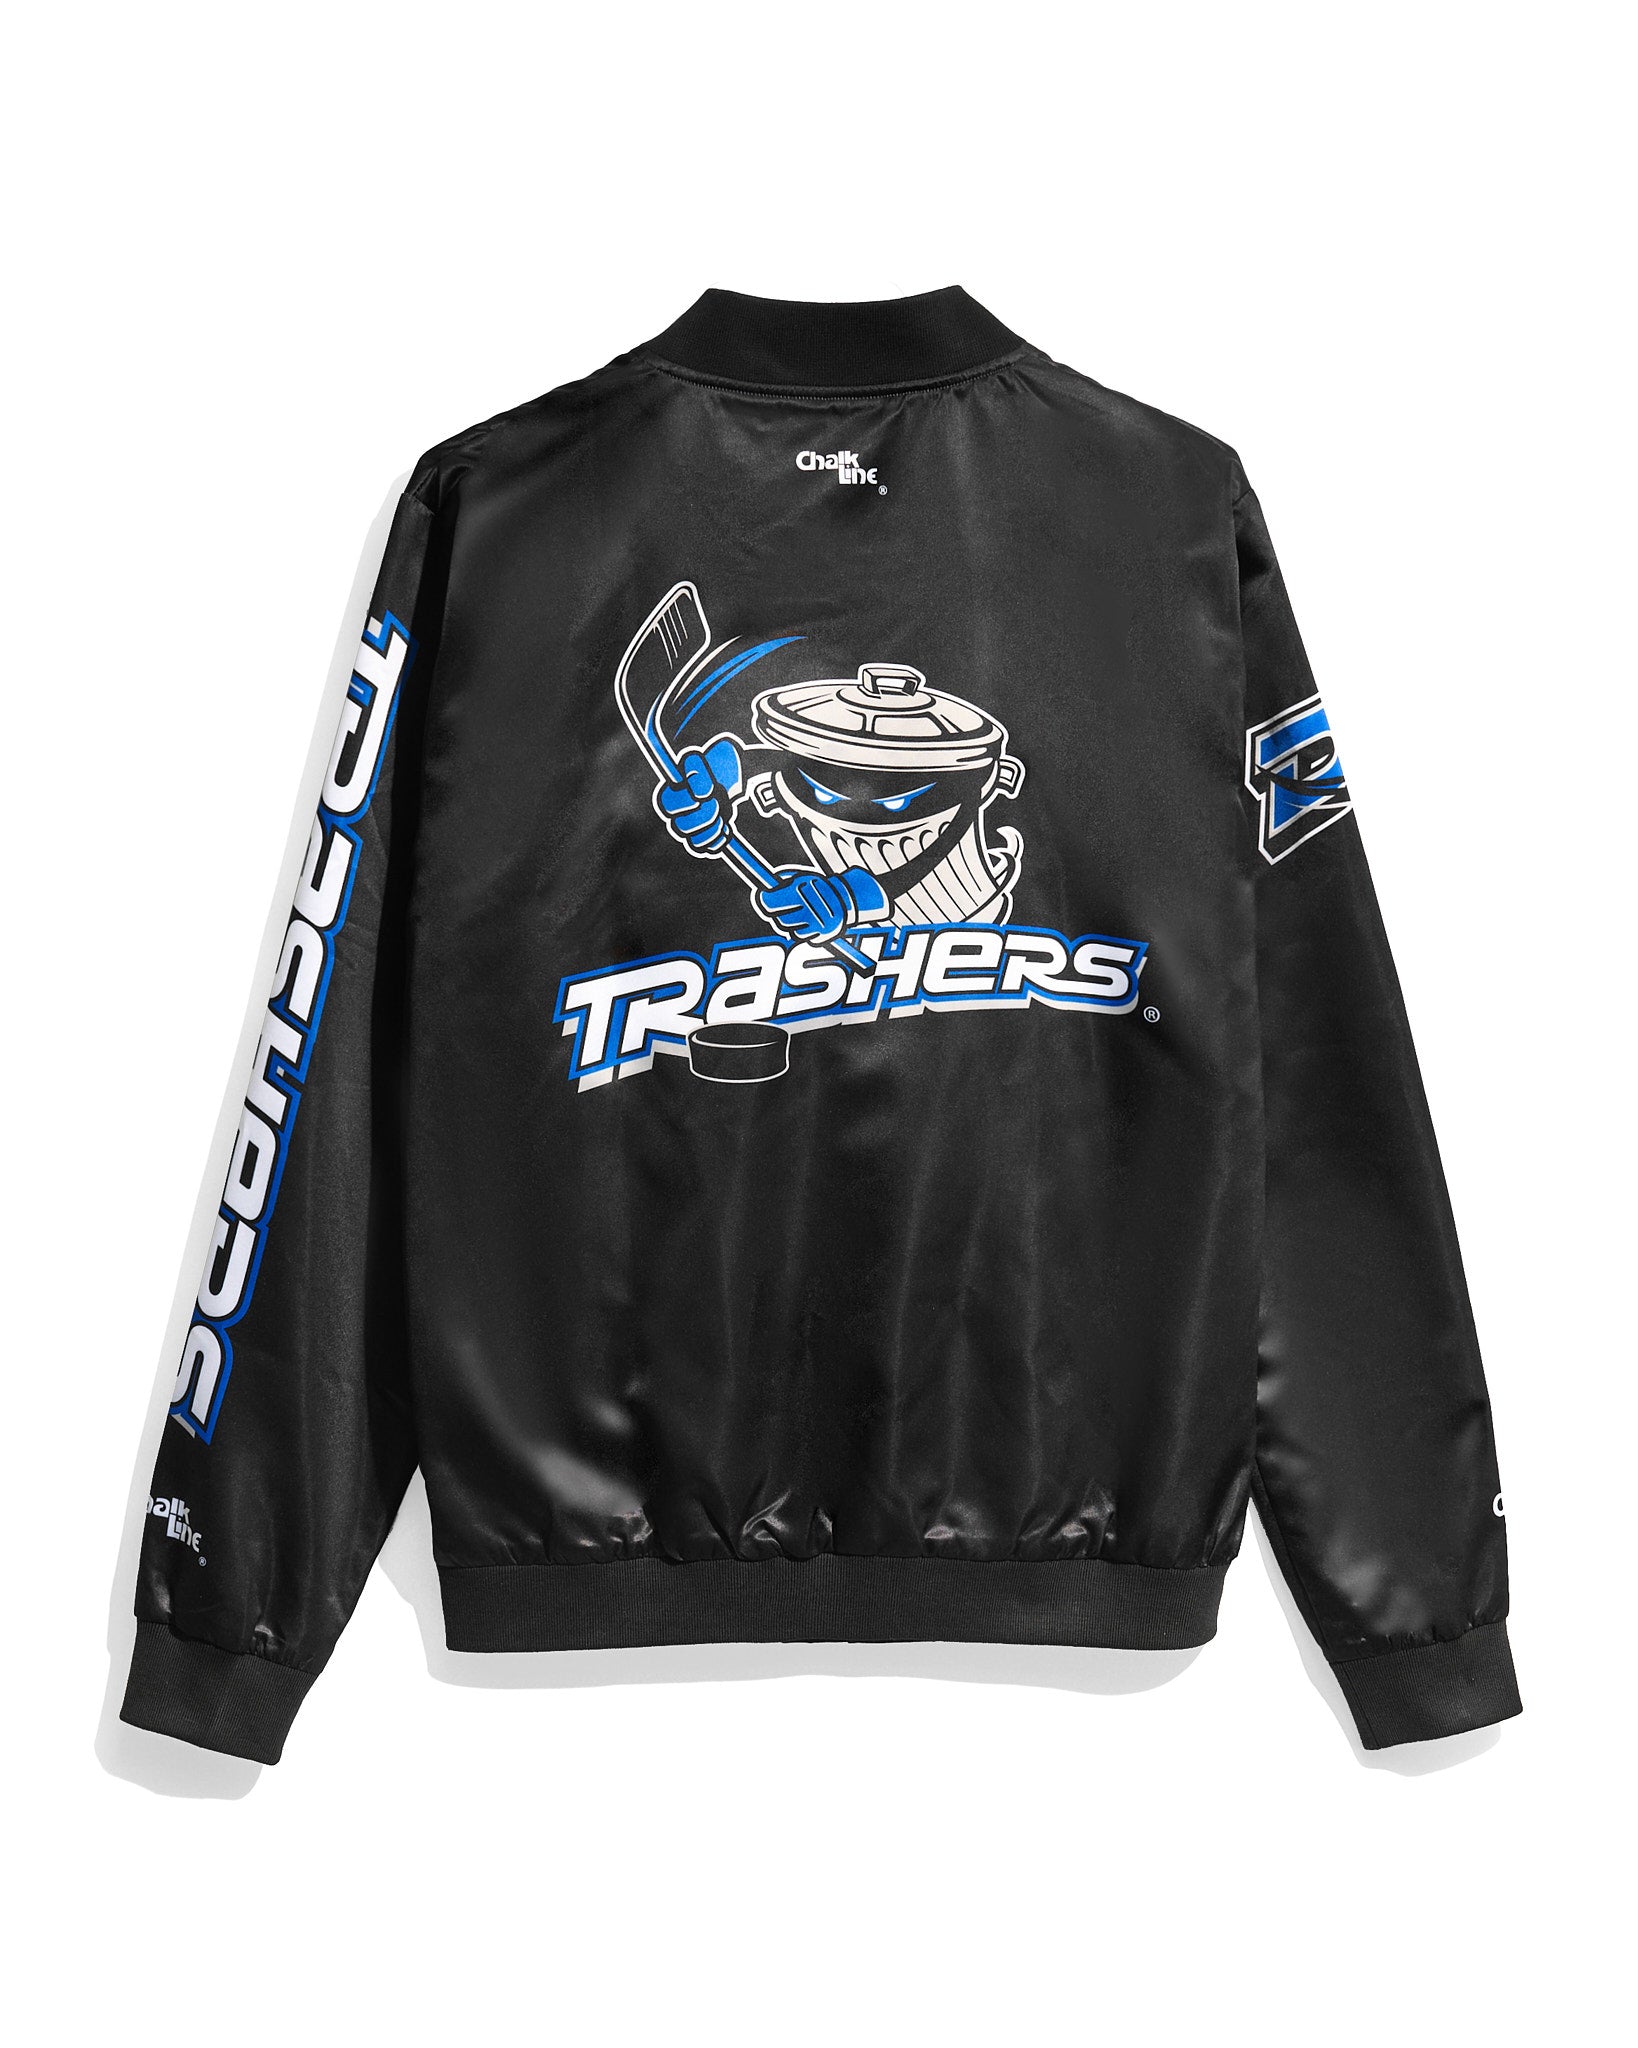 Danbury Trashers Merchandise Now Available Due to High Demand